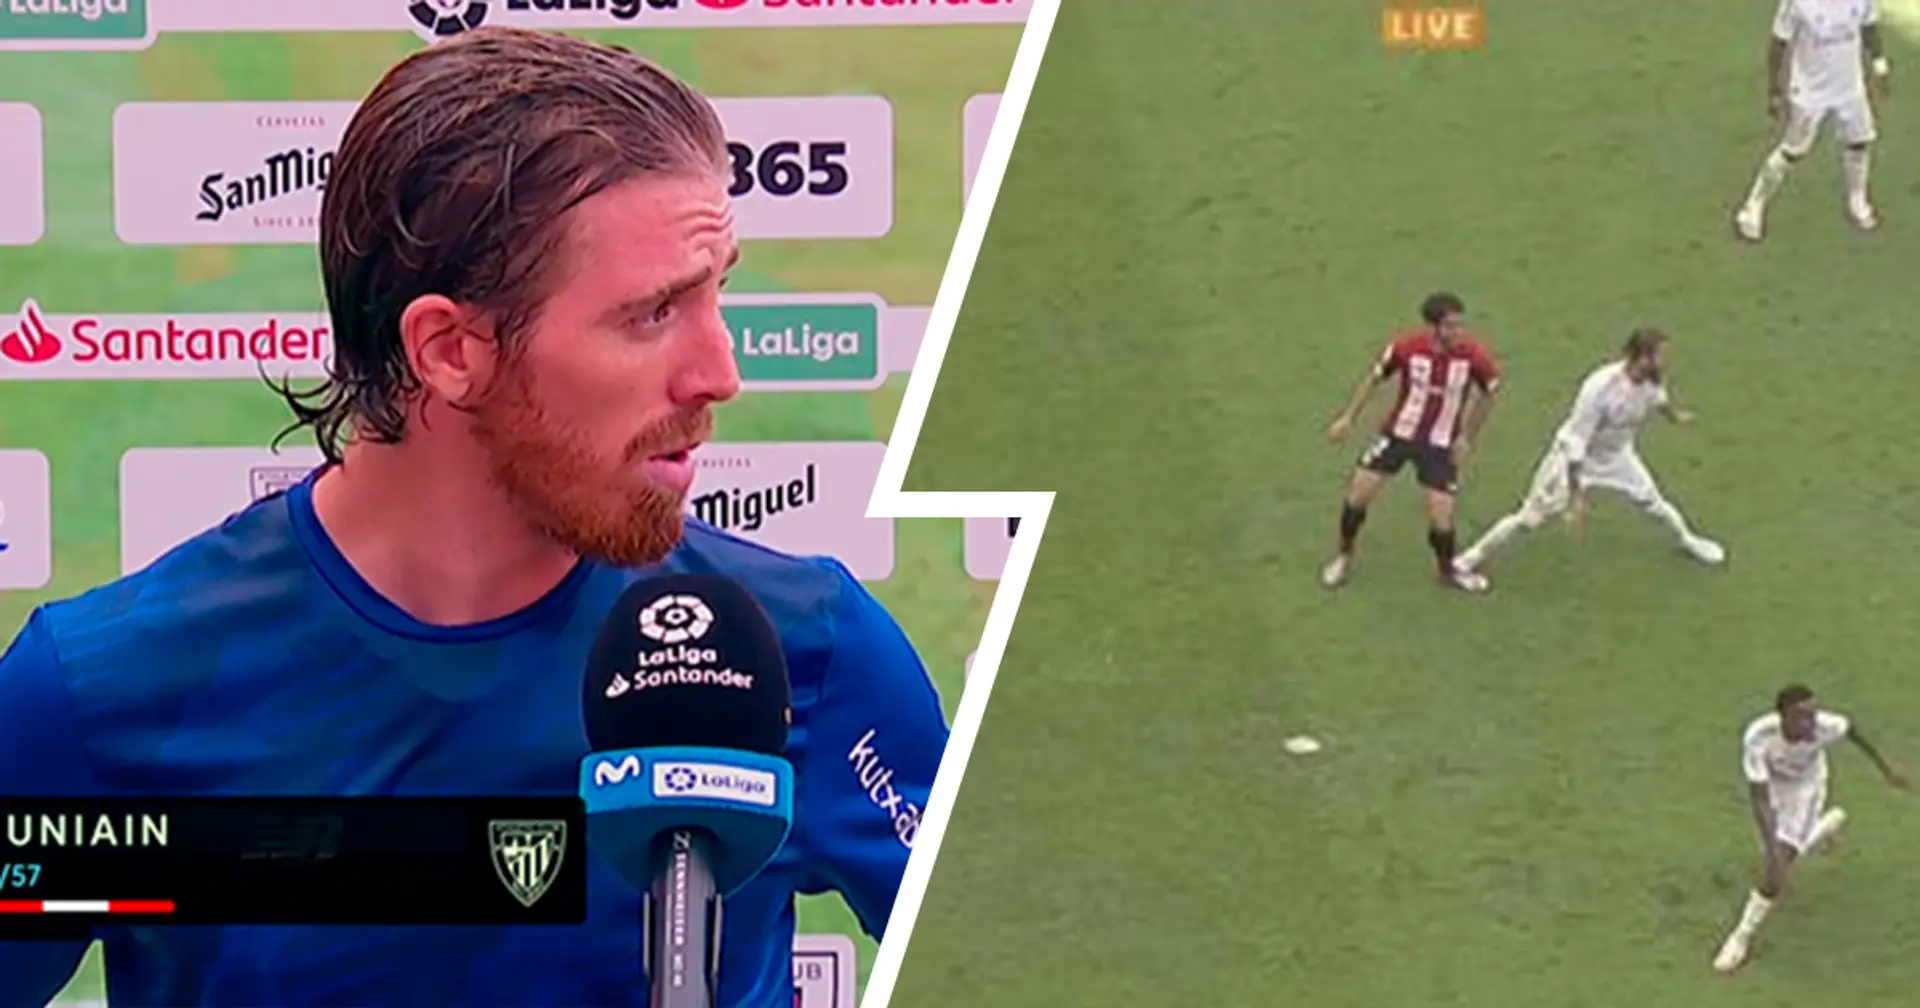 'Their penalty was reviewed and ours wasn't': Bilbao's Iker Muniain blasts refereeing in Madrid game – but is he right?